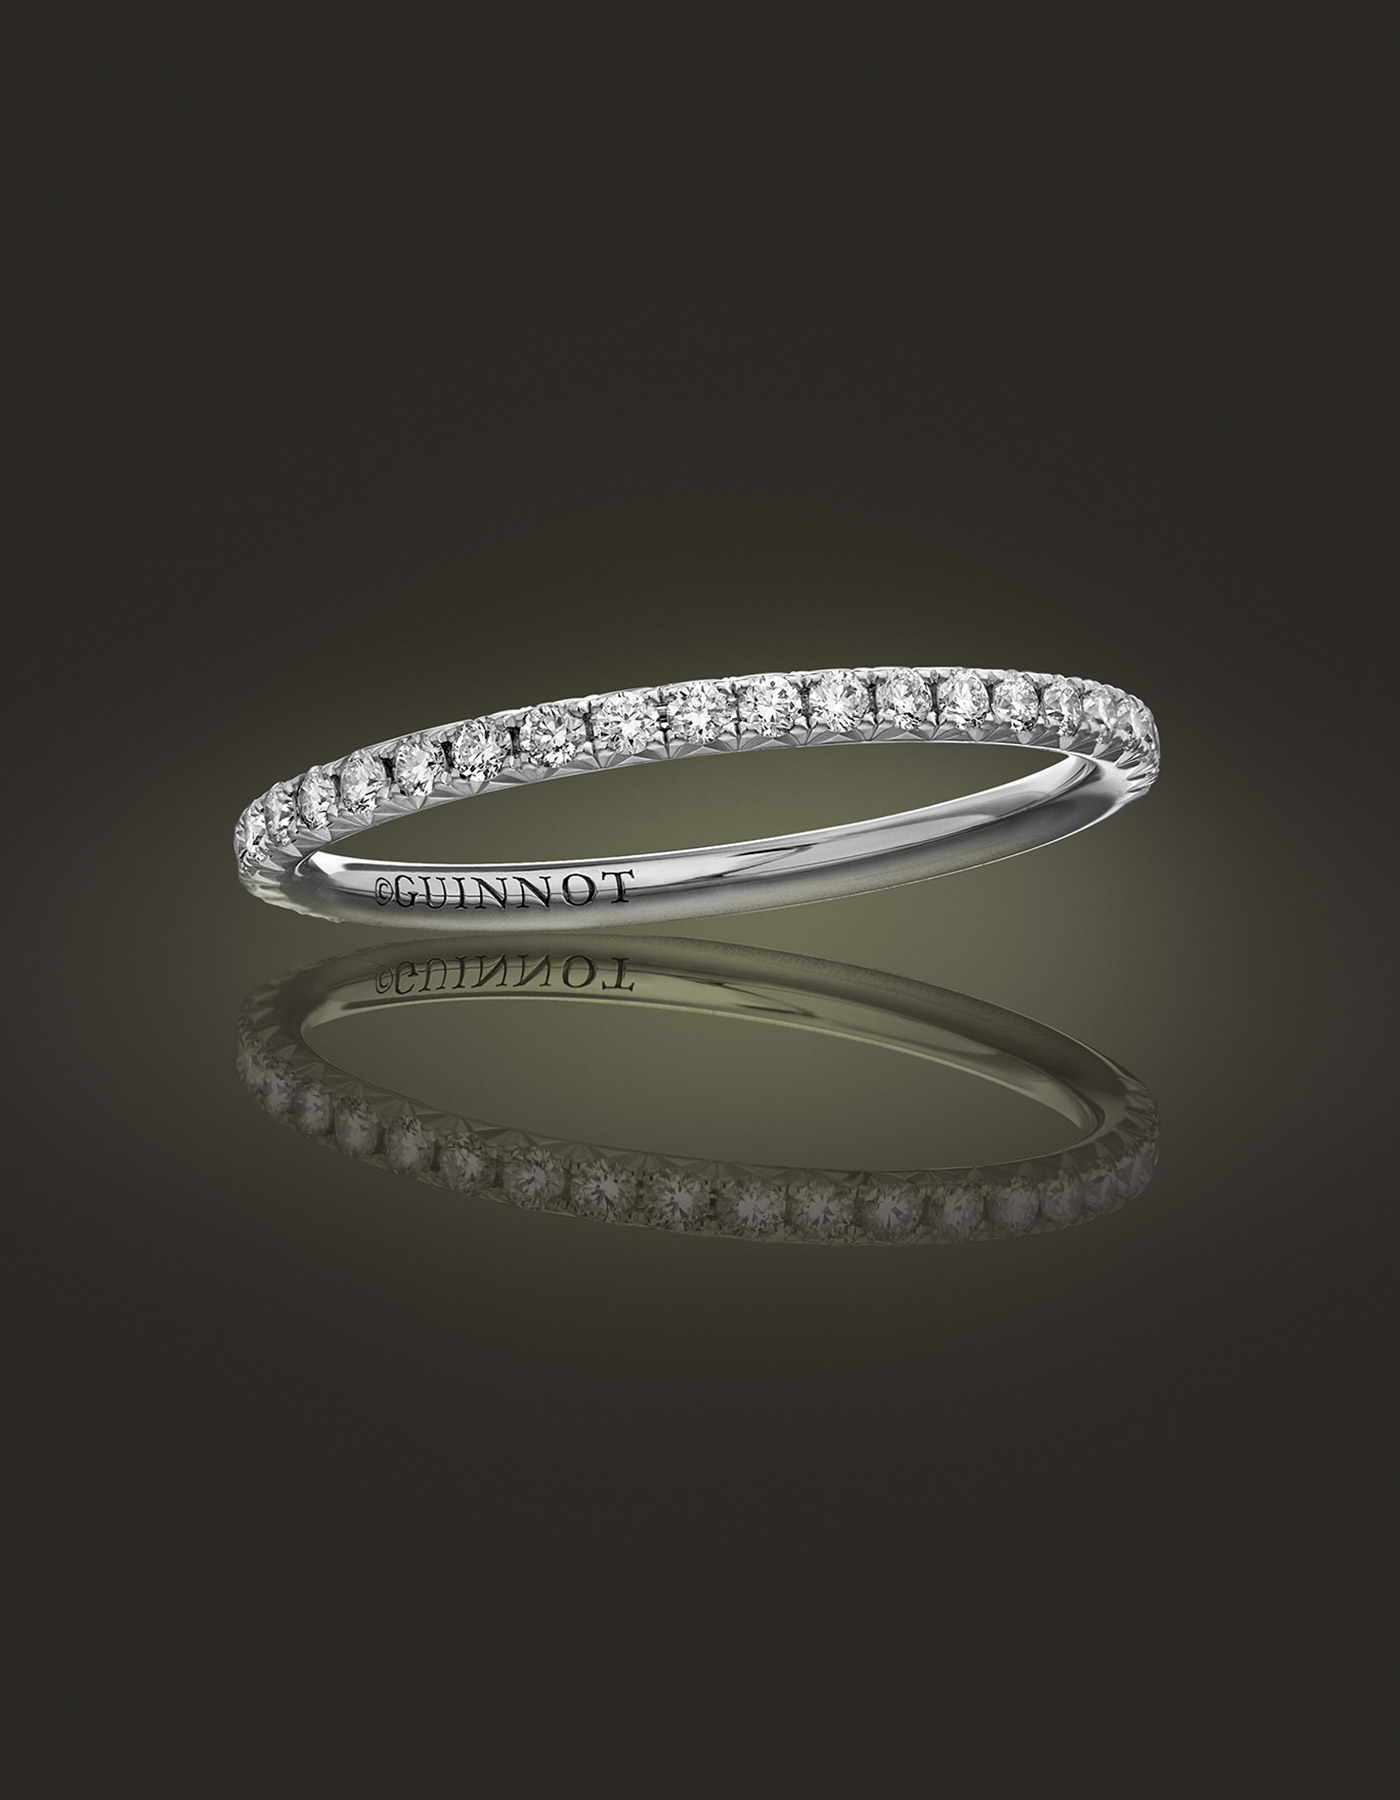 Guinnot Anonymous Diamond microband eternity ring in 18k white gold